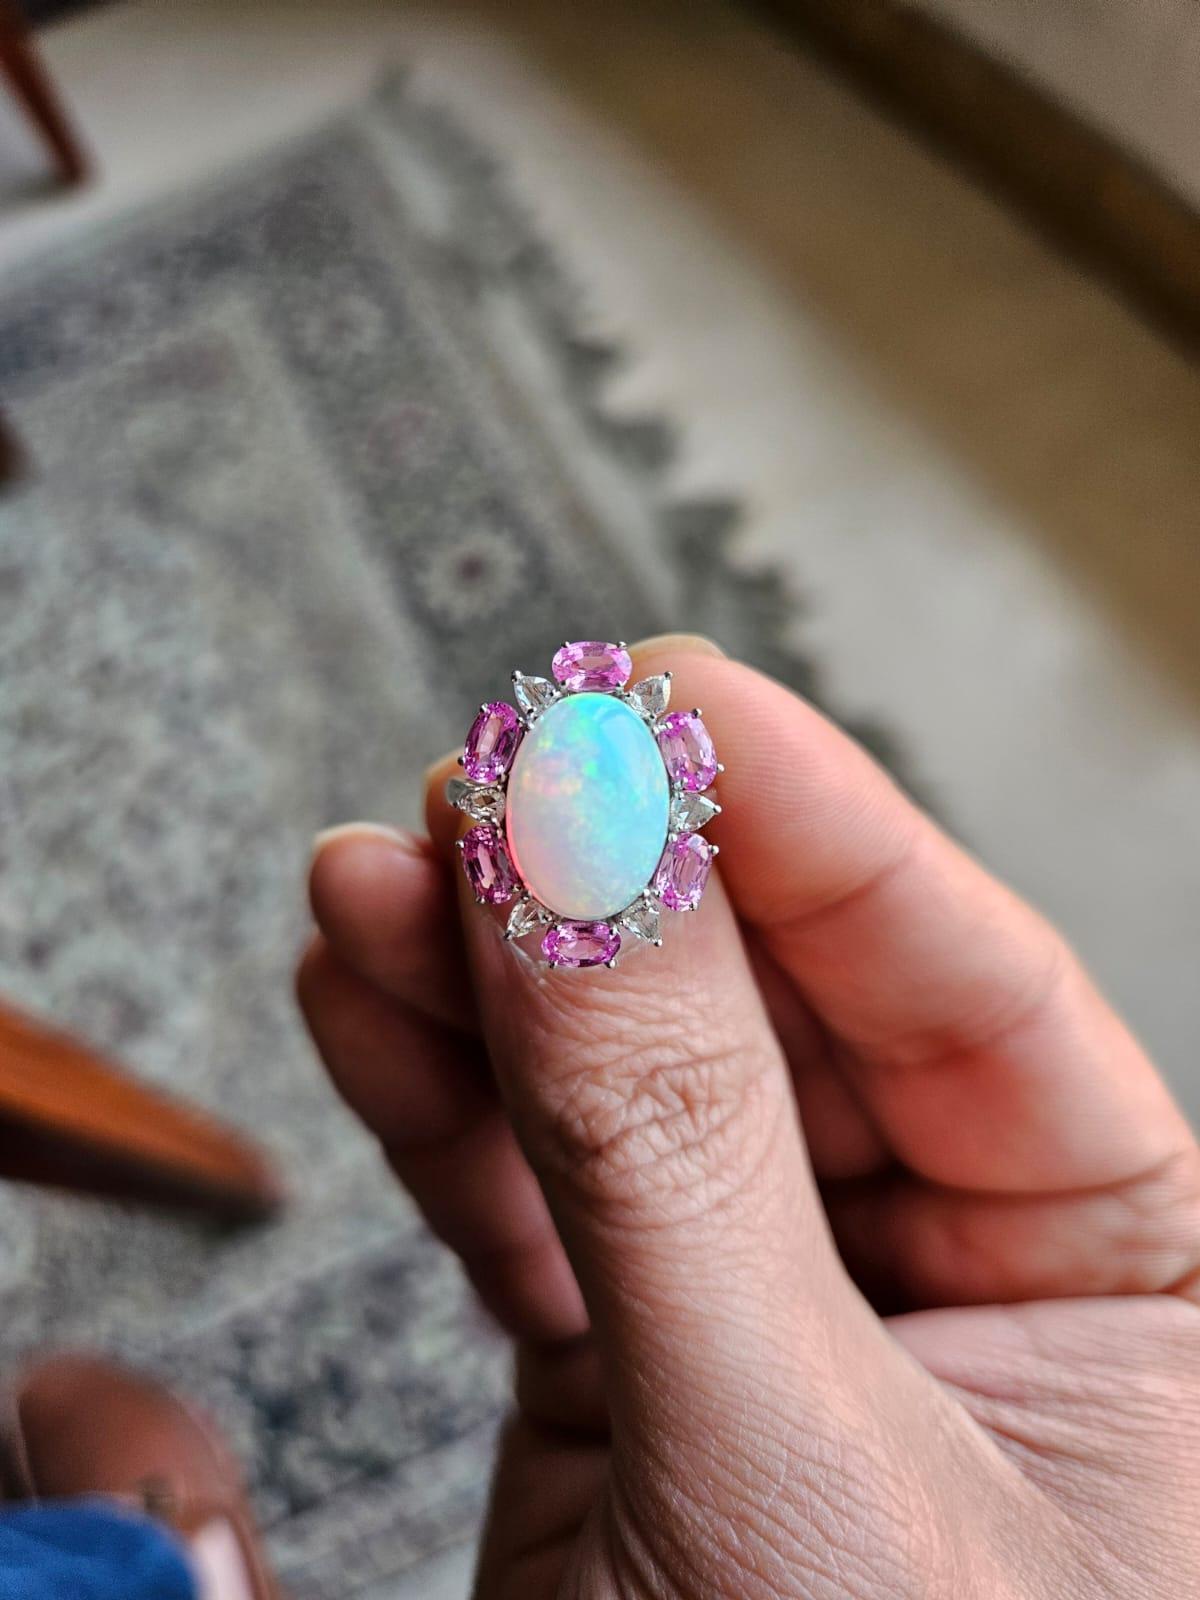 A very gorgeous and beautiful, modern style Opal & Pink Sapphires Engagement Ring set in 18K White Gold & Diamonds. The weight of the Opal is 4.04 carats. The Opal is of Ethiopian origin. The weight of the Pink Sapphires is 1.74 carats. The Pink